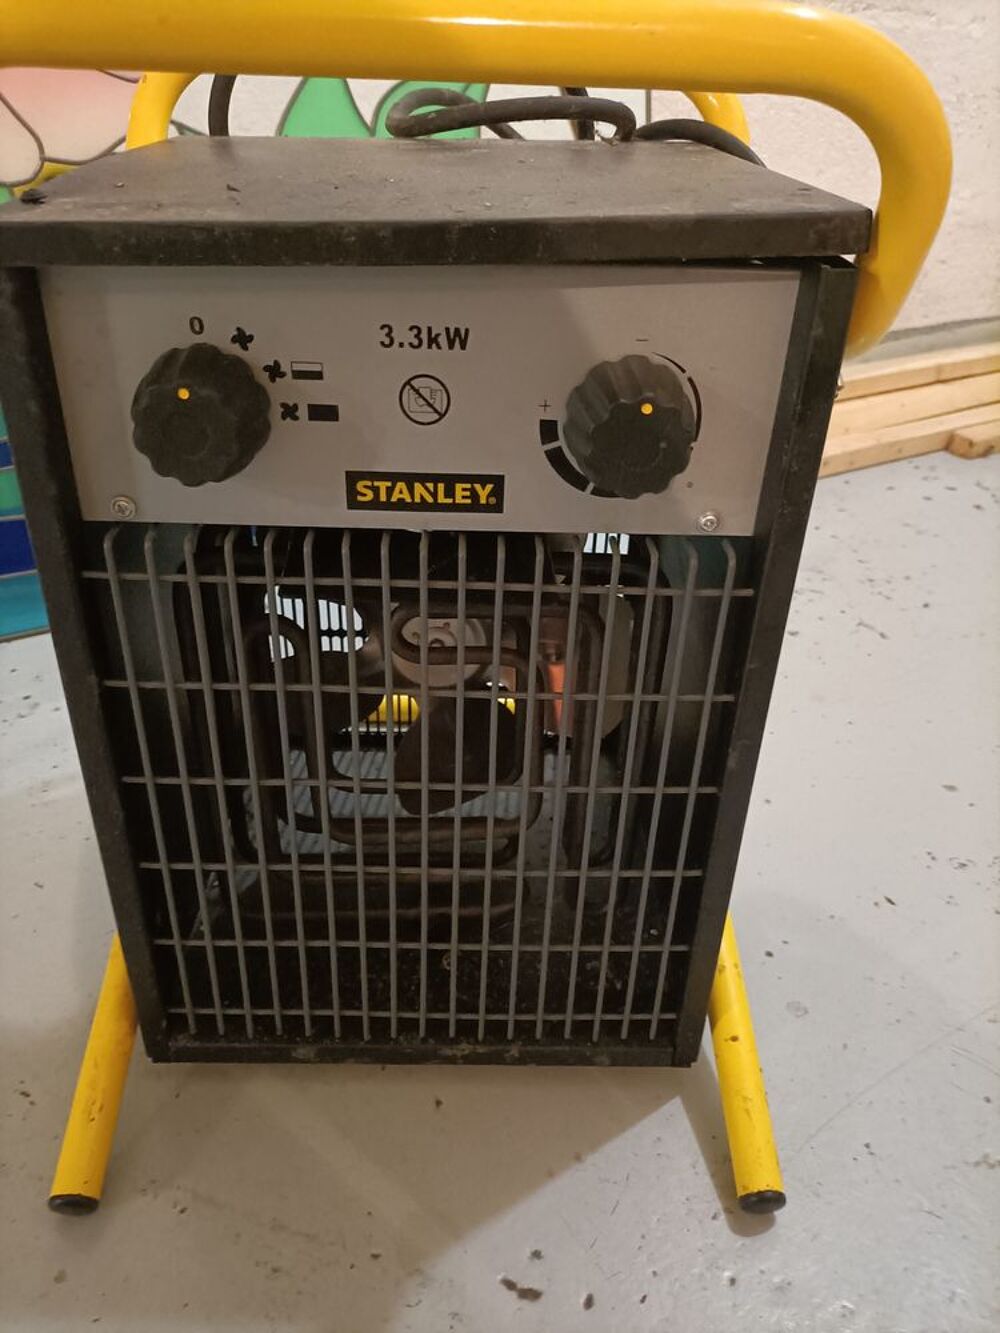 Chauffage d'appoint STANLEY 3.3kW Electromnager